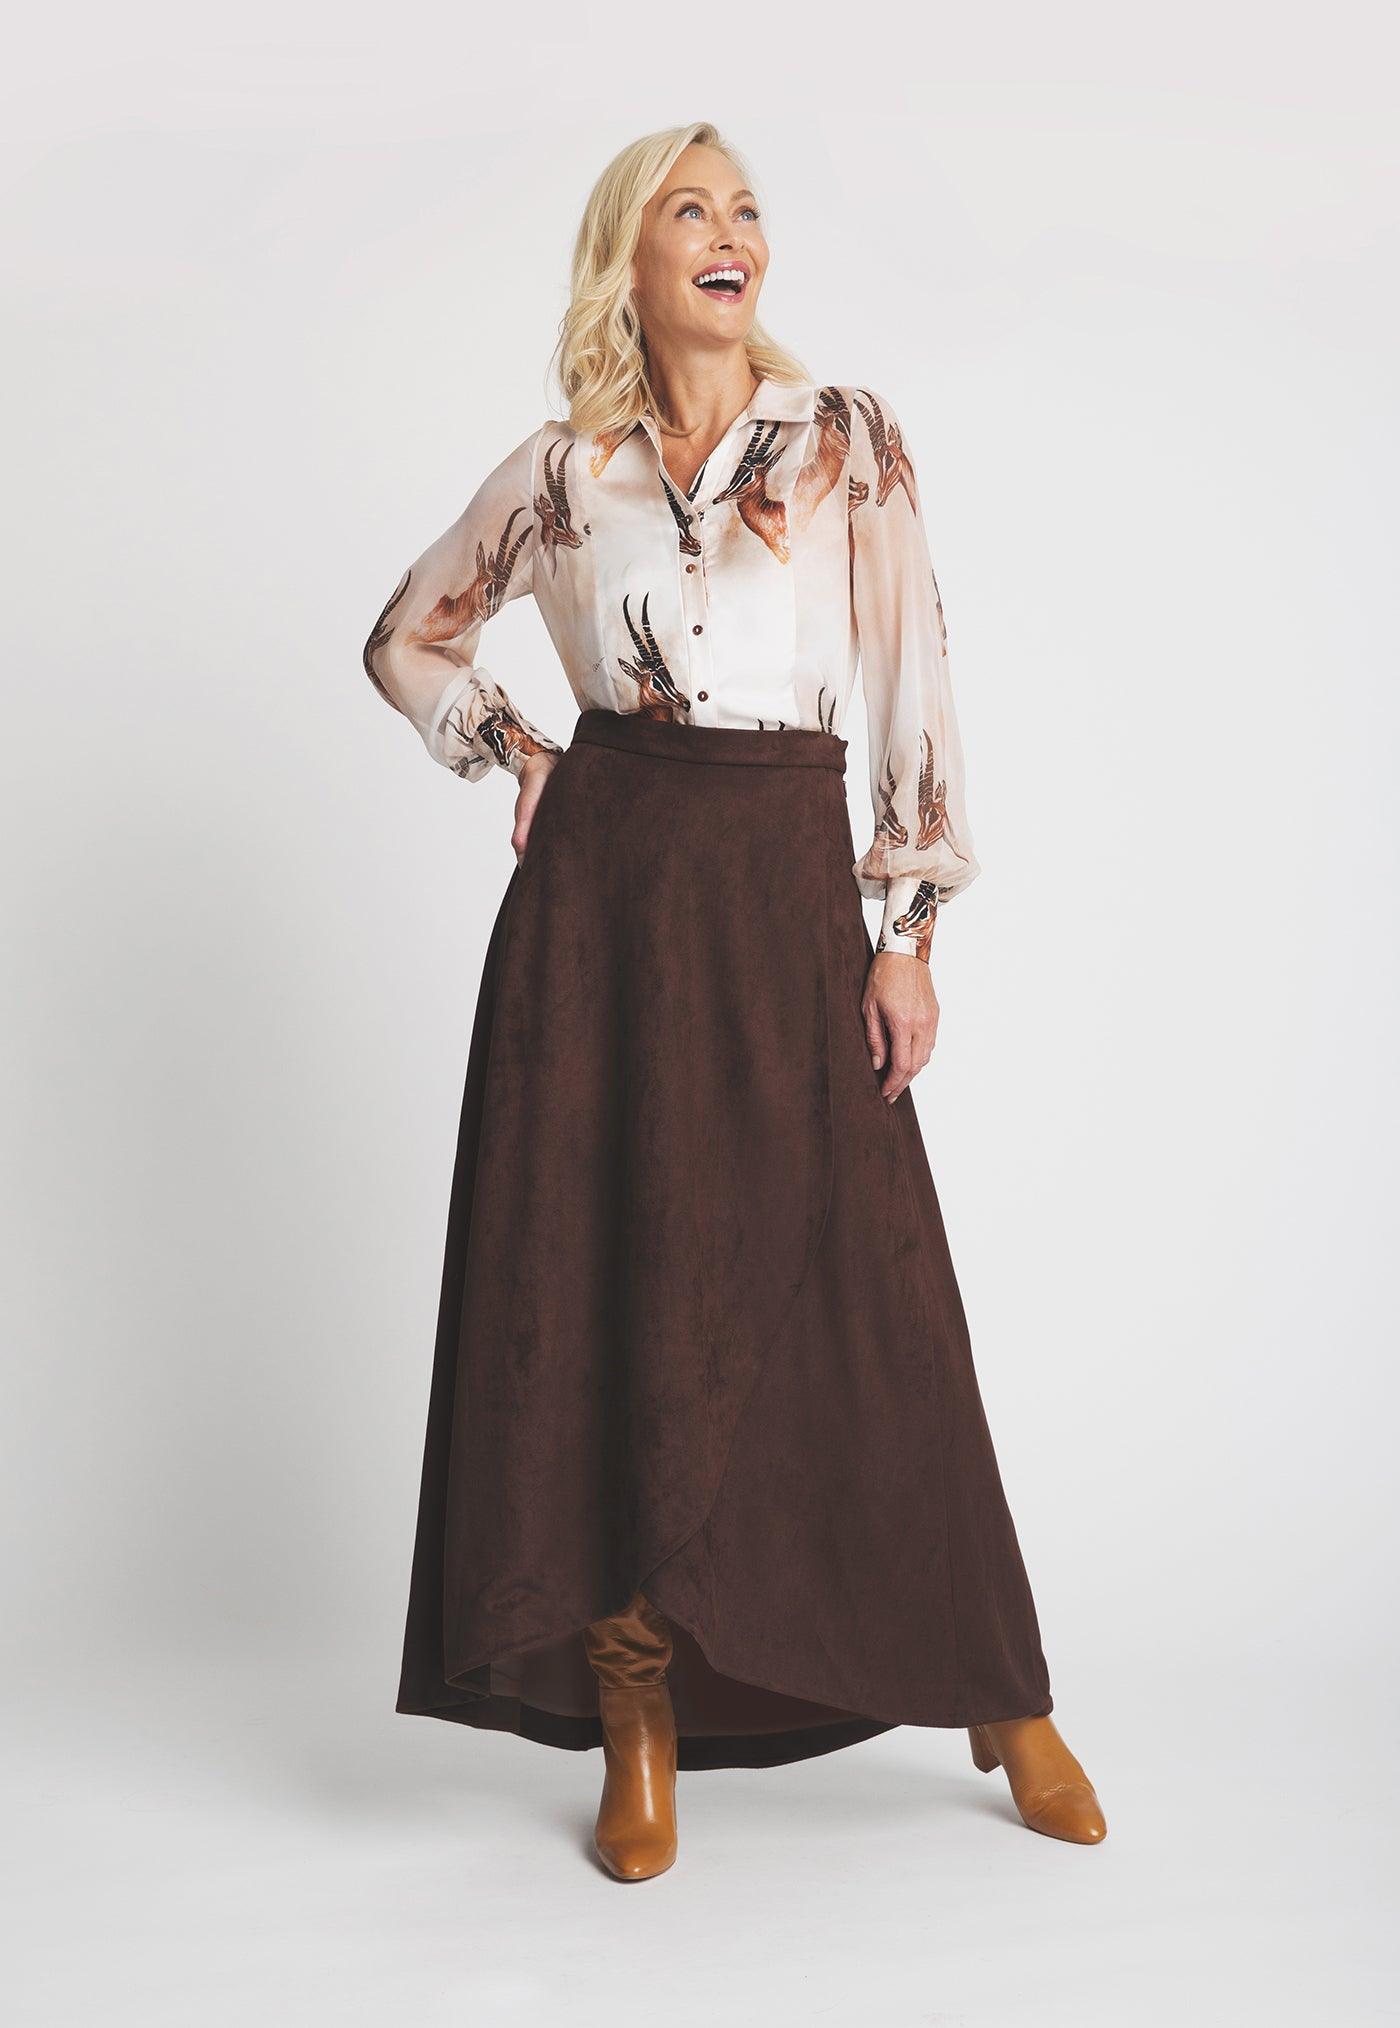 silk bellowed sleeve blouse with antelope print with brown suede long skirt